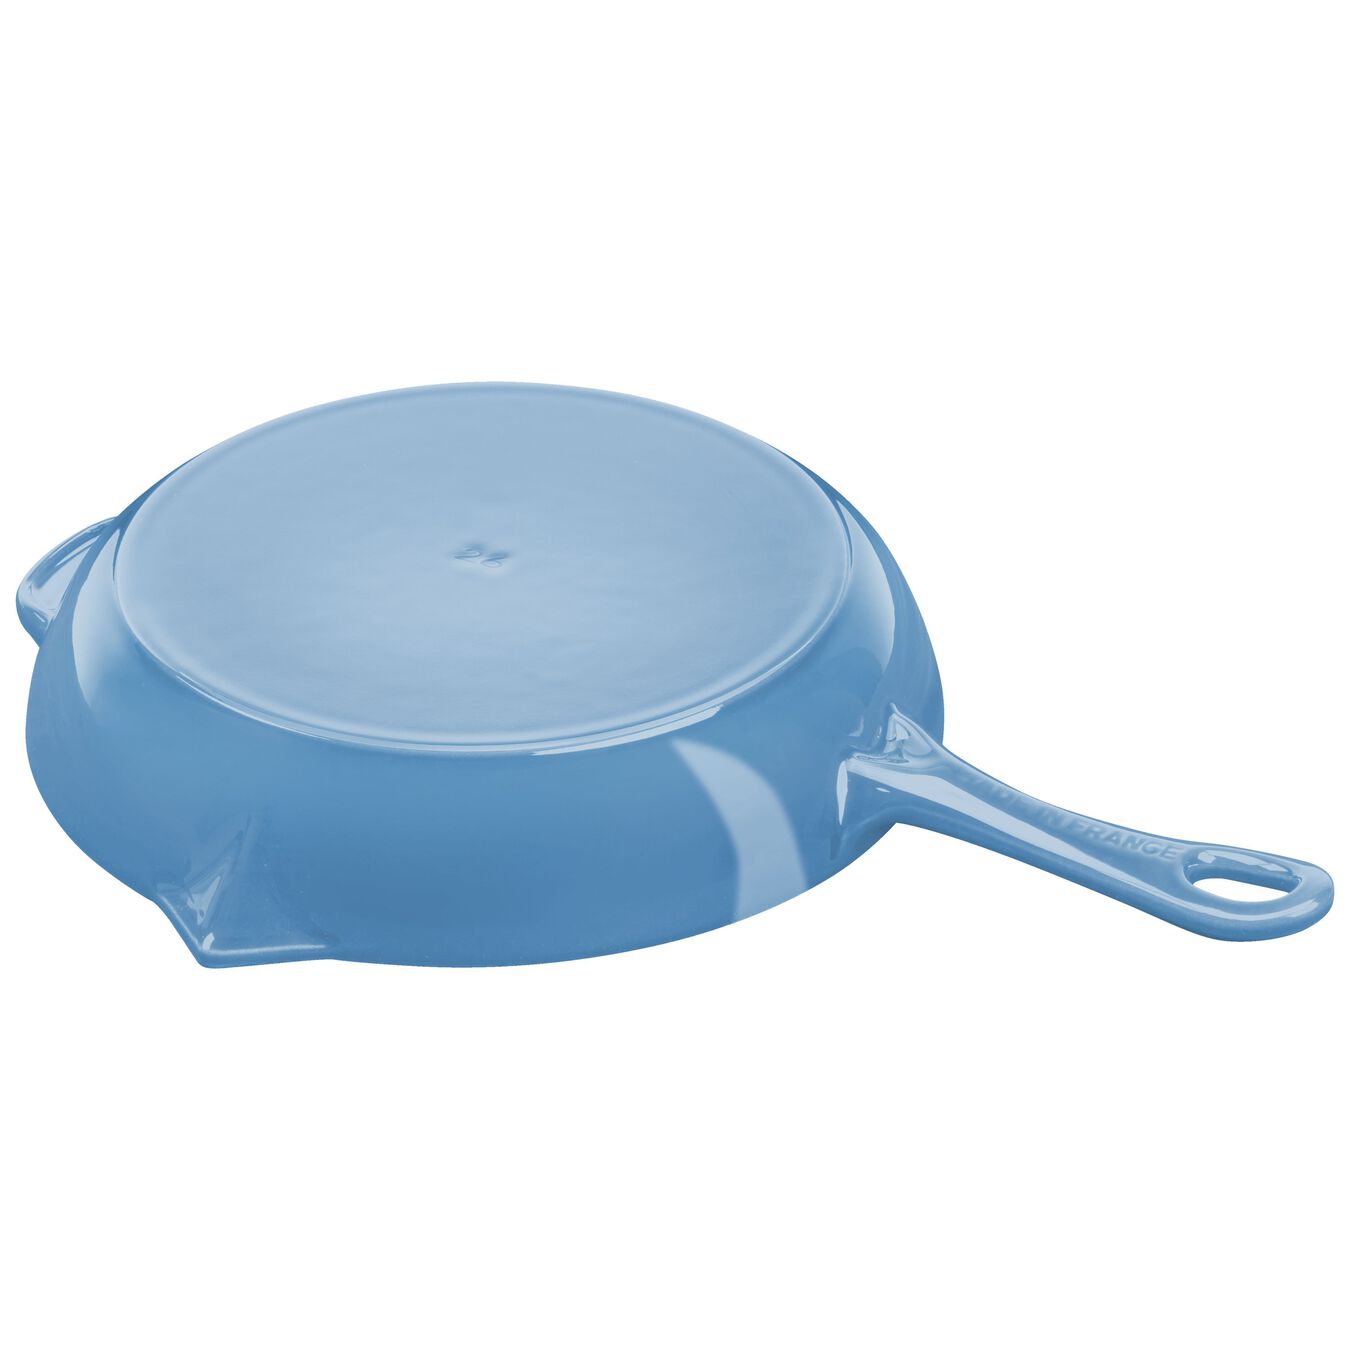 26 cm / 10 inch cast iron Frying pan, ice-blue,,large 2